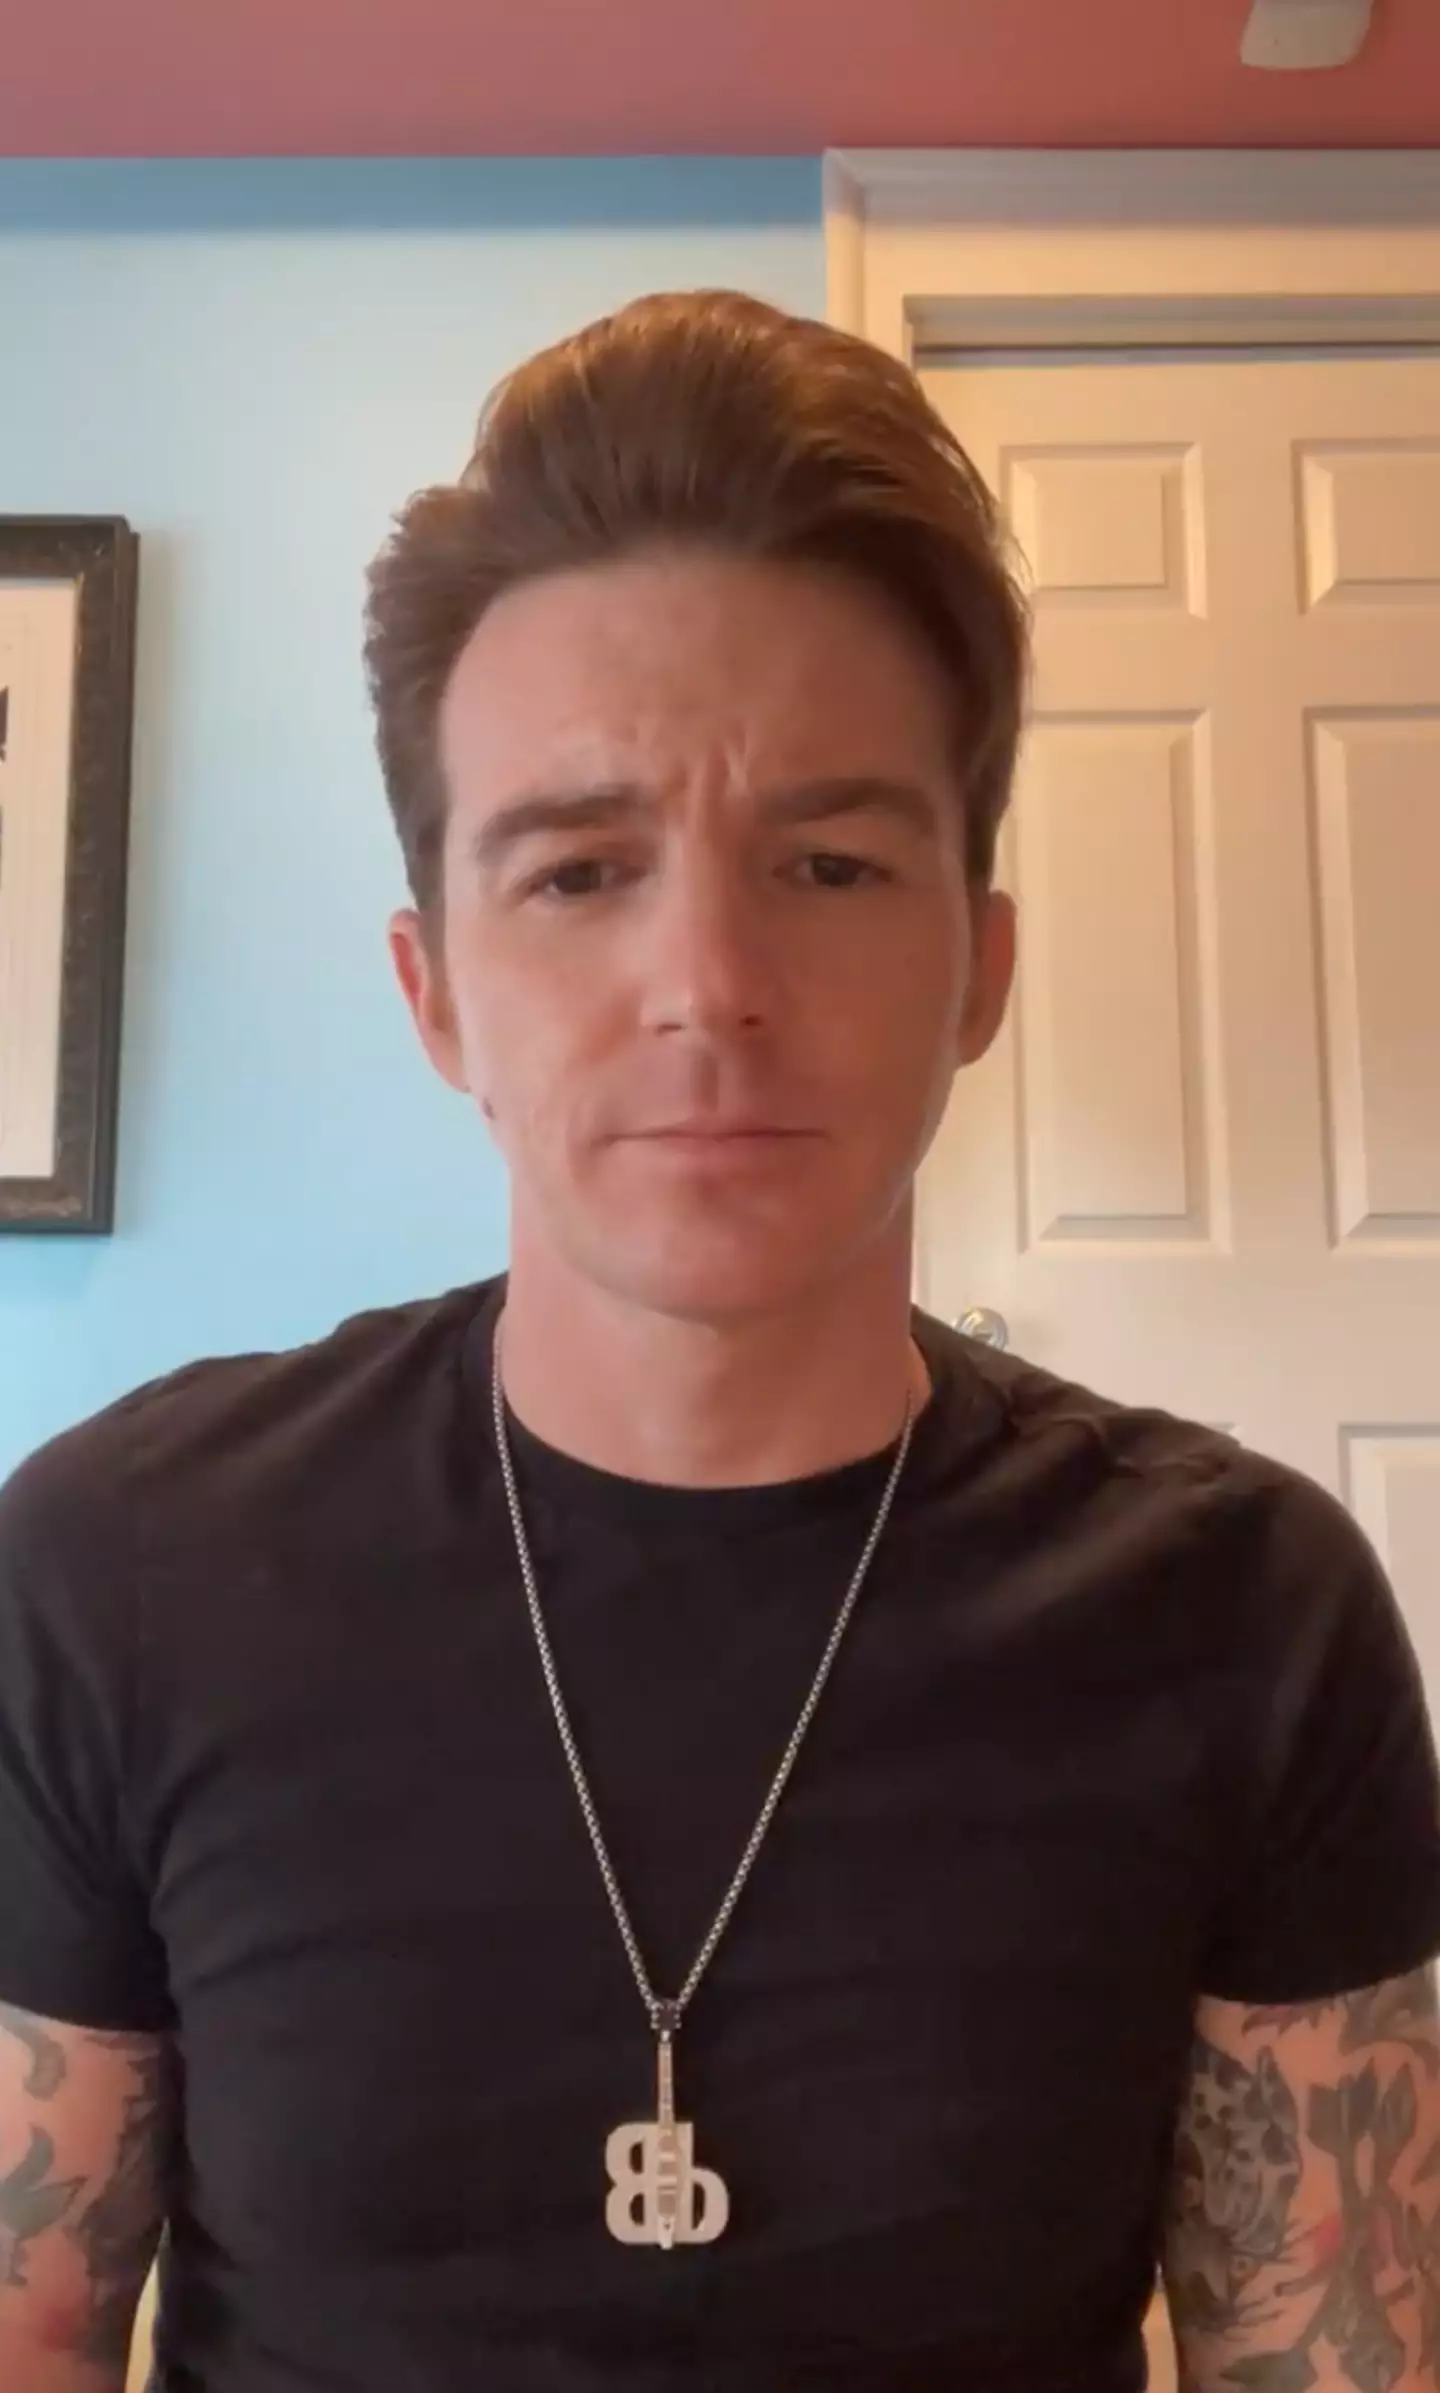 Drake Bell's whereabouts are now known and he is in contact with police.